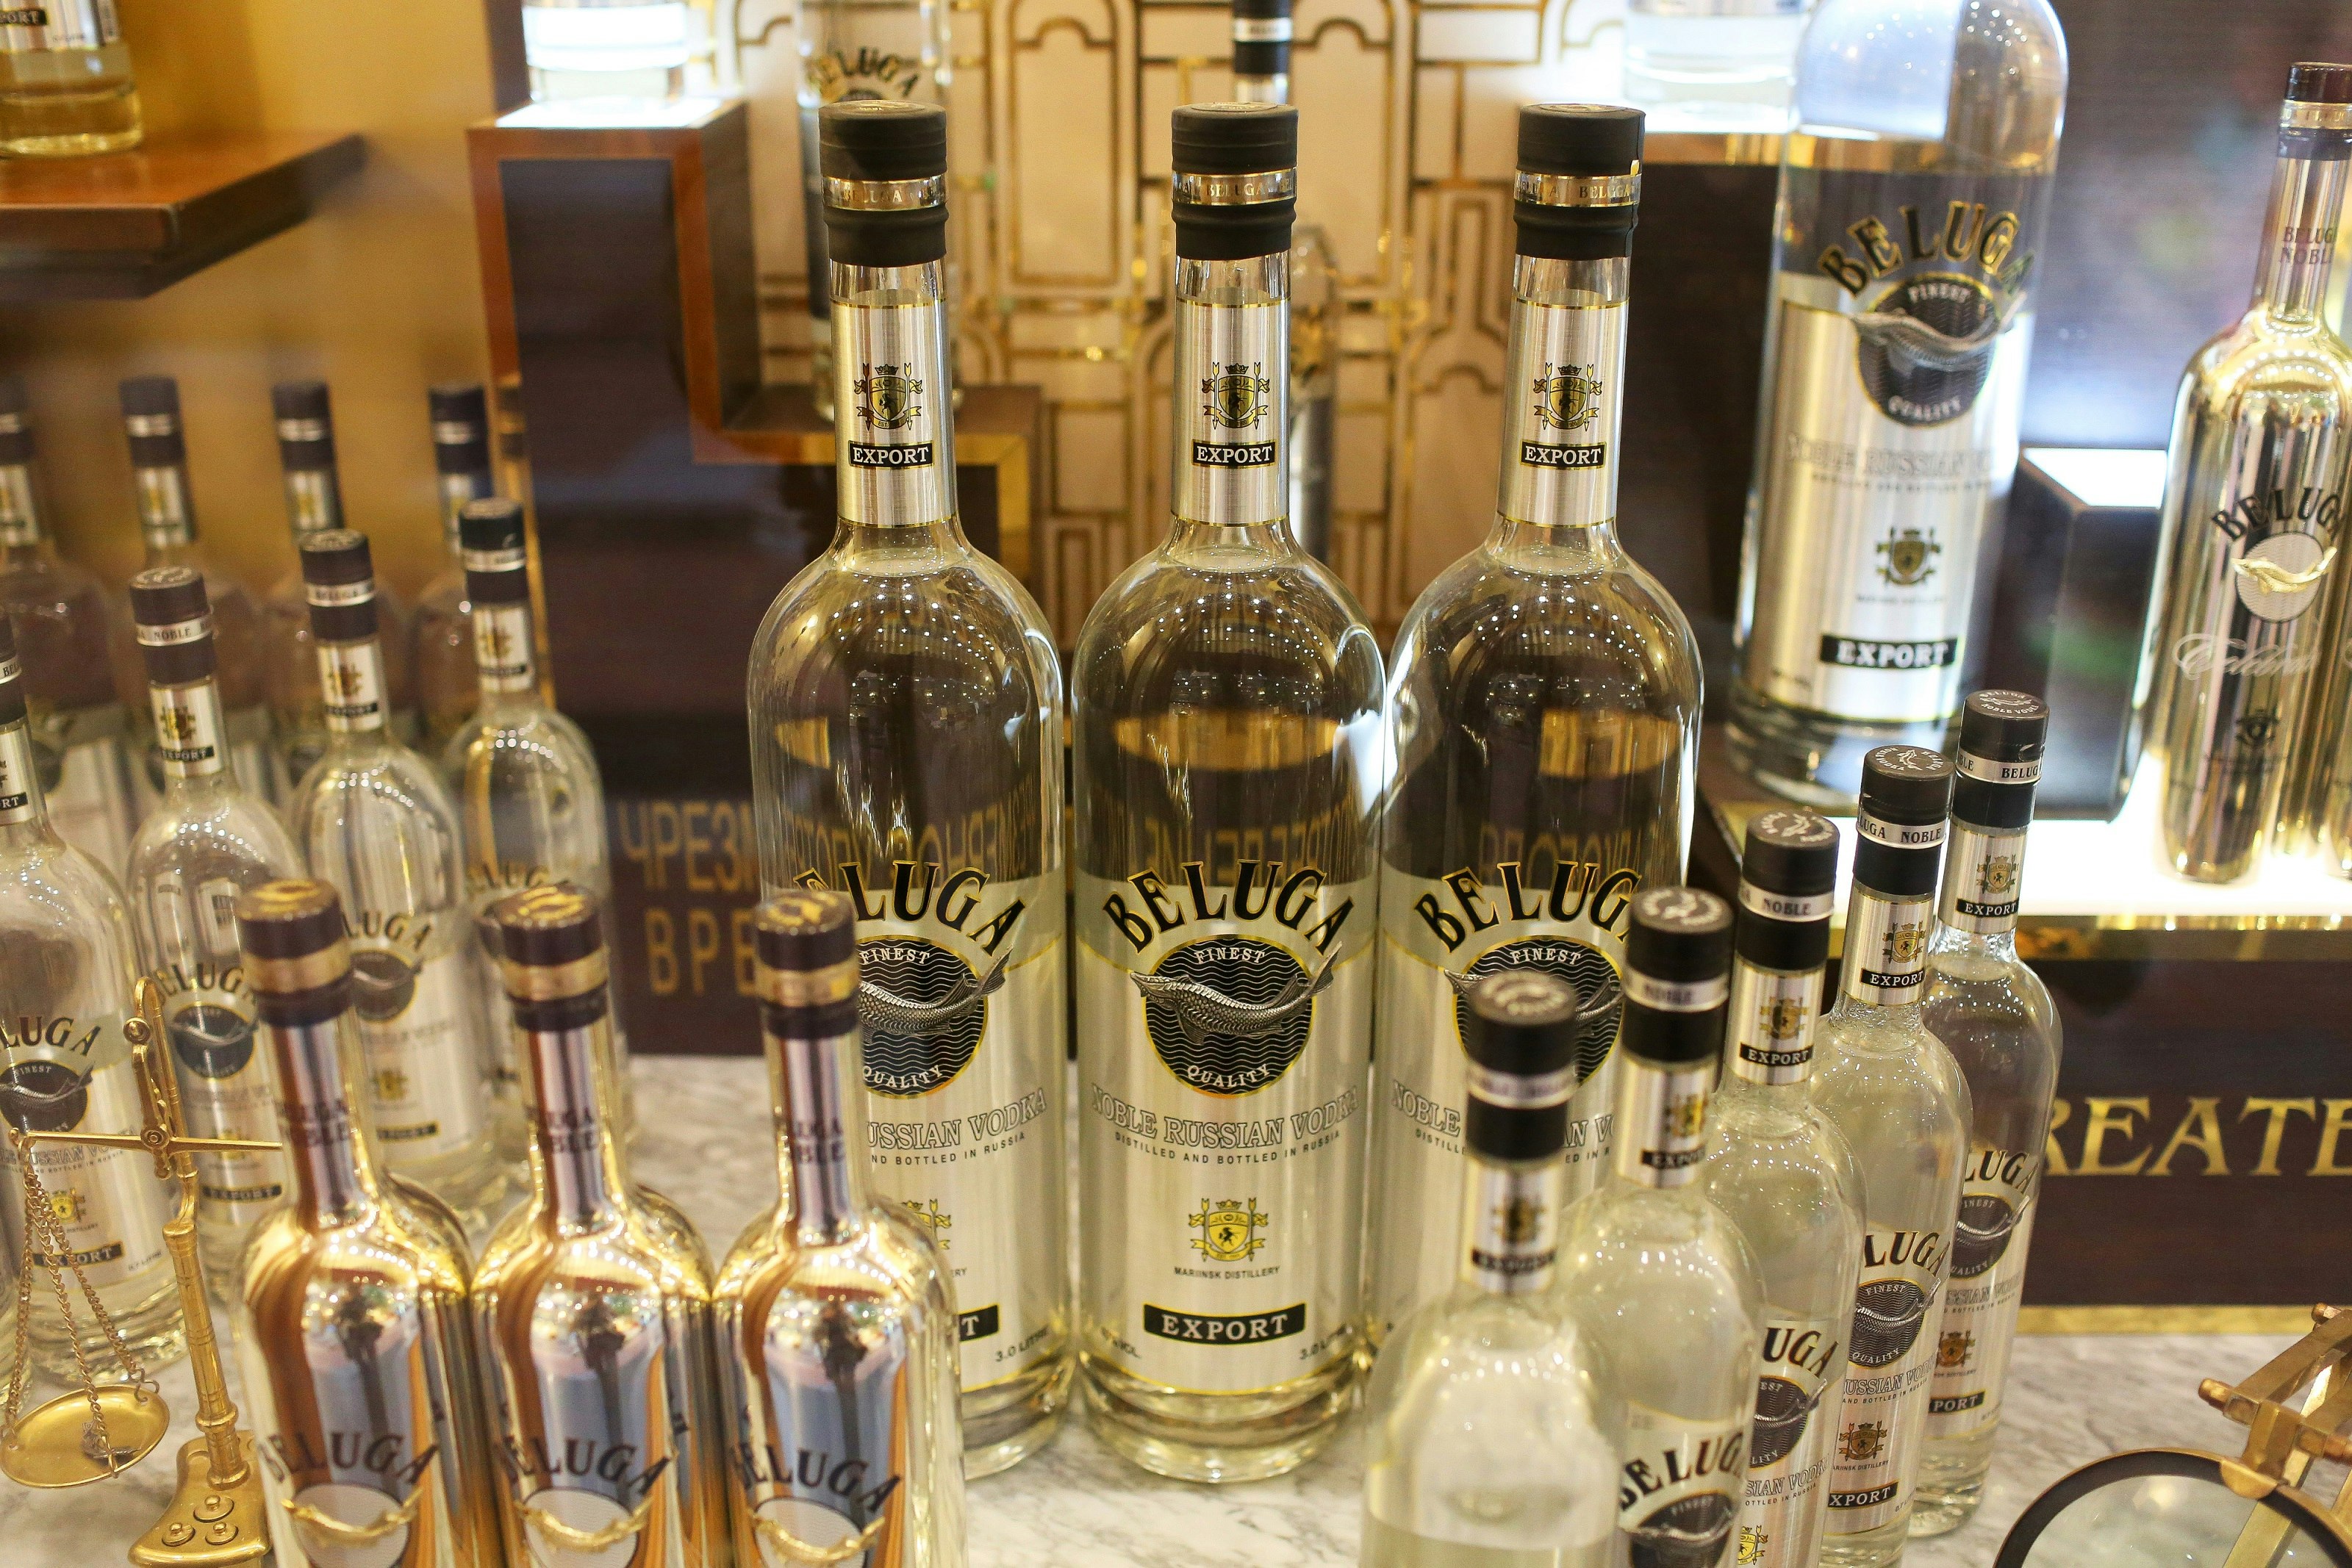 Approximately twenty different vodka bottles arranged in a neat display. All are labelled Beluga Finest Quality Vodka.